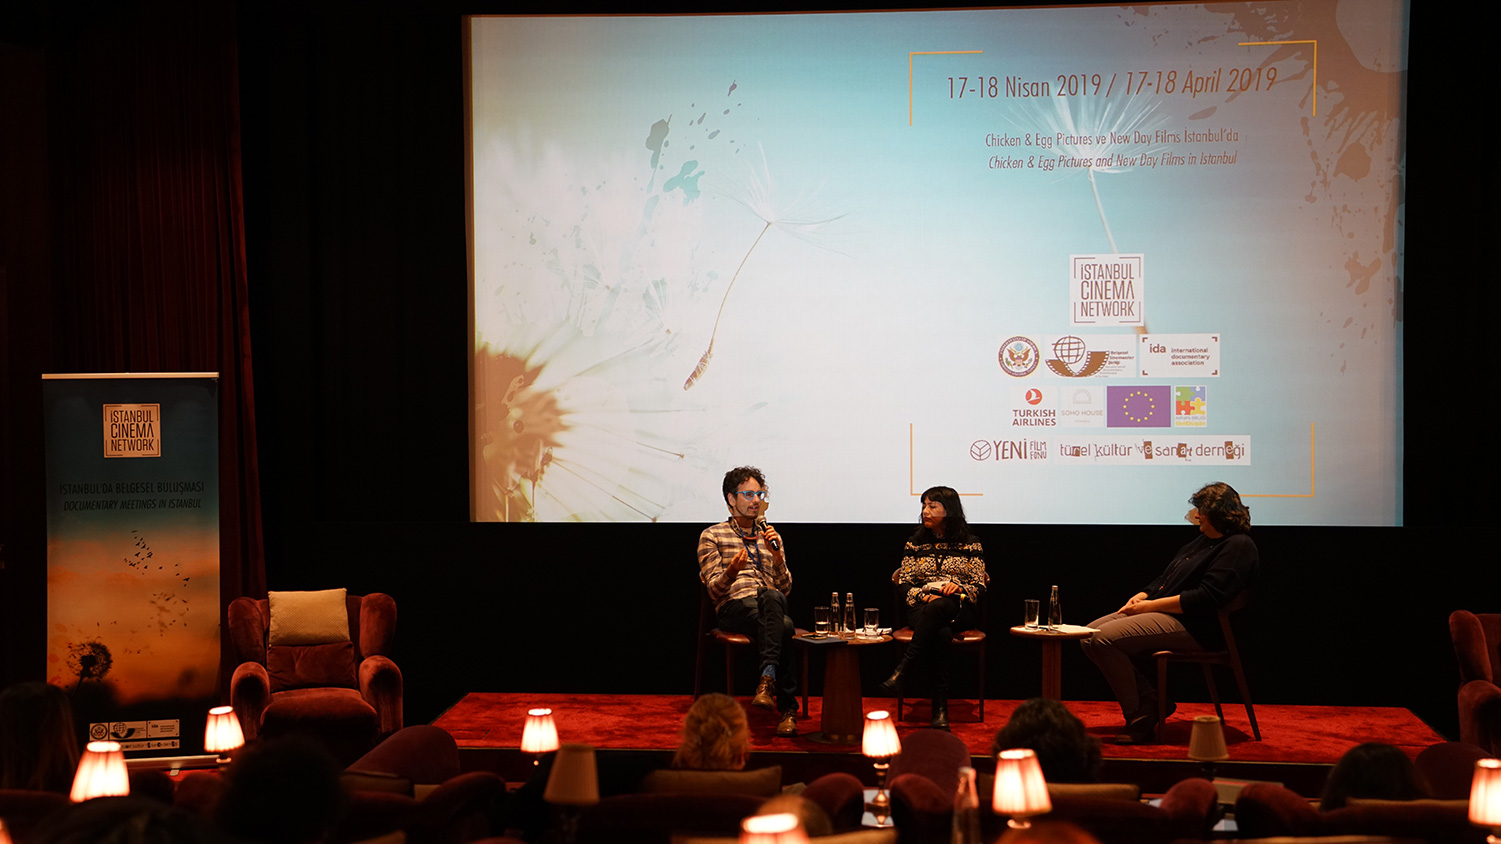 Istanbul Cinema Network’s panel discussion with Jonathan Skurnik, New Day Films, and Lucila Moctezuma, Chicken and Egg.